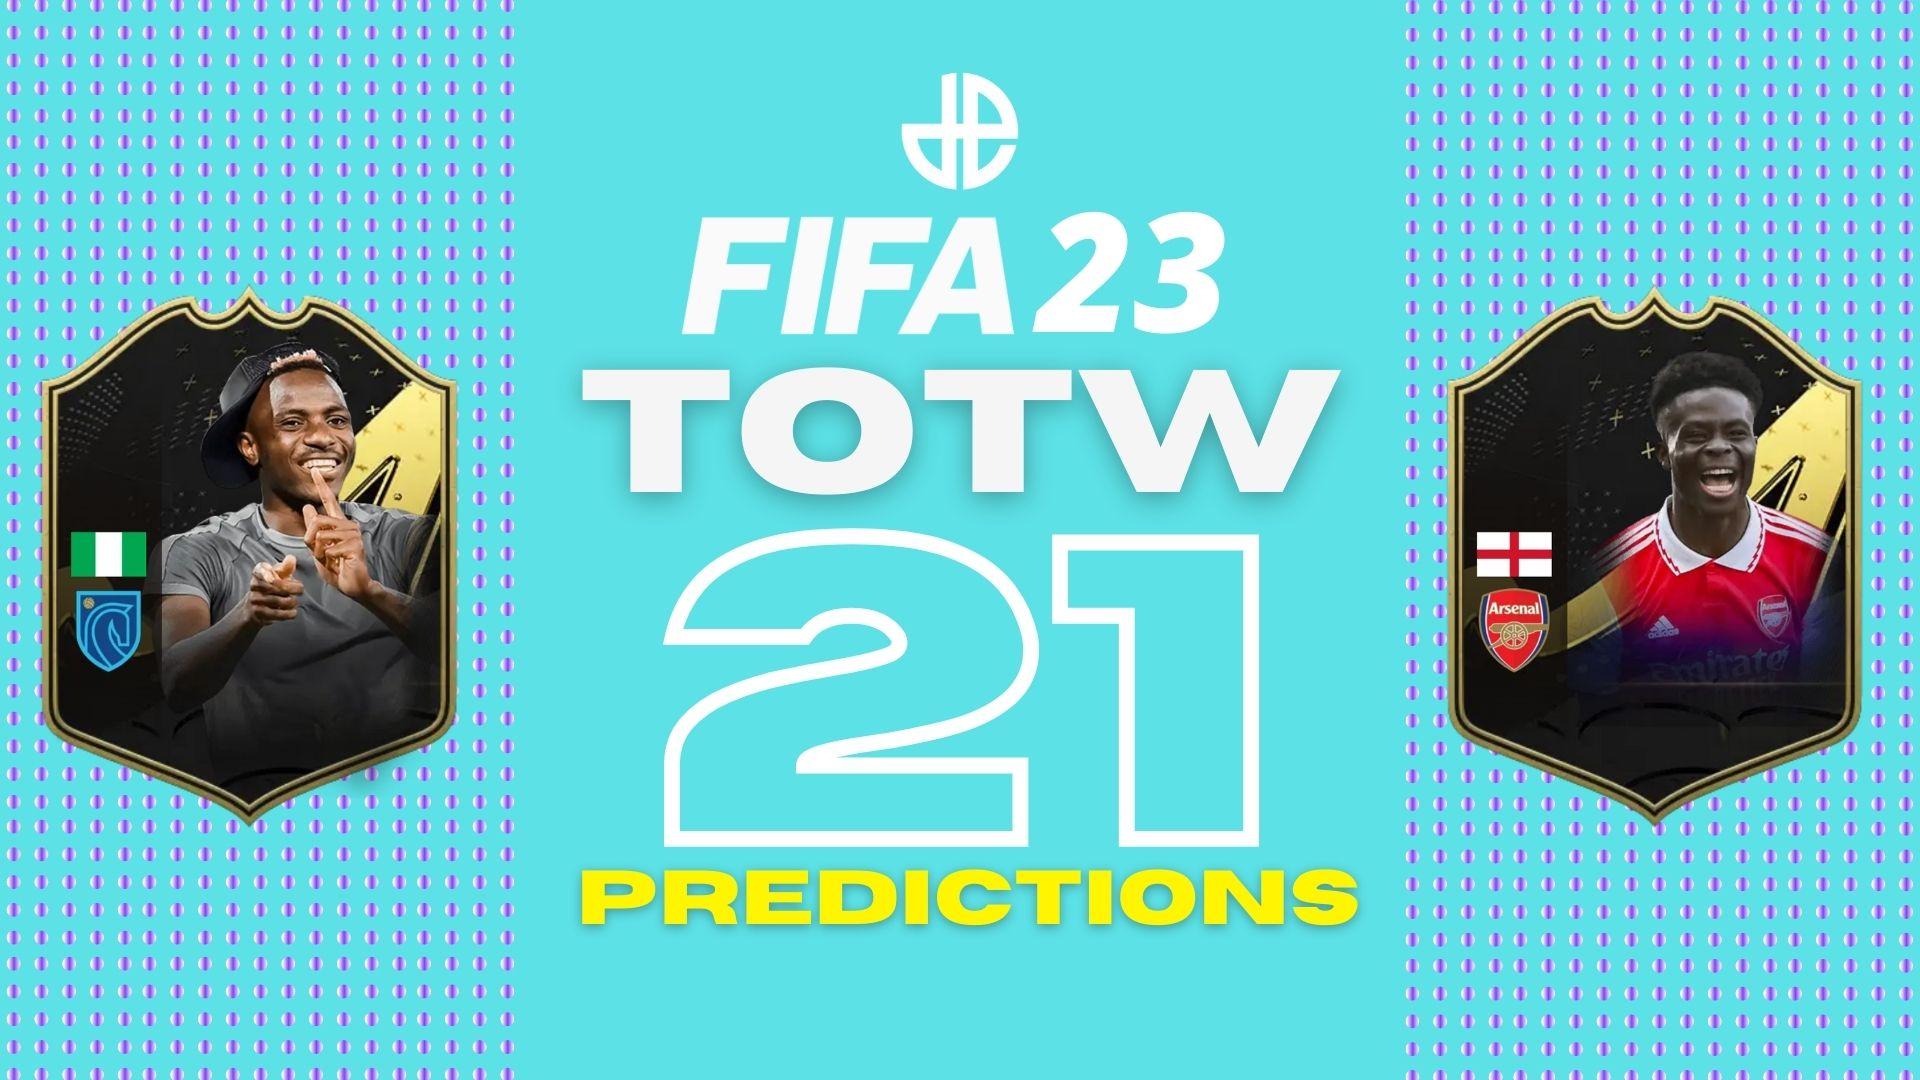 FIFA 23 Saka and Osimhen cards for TOTW 21 predictions